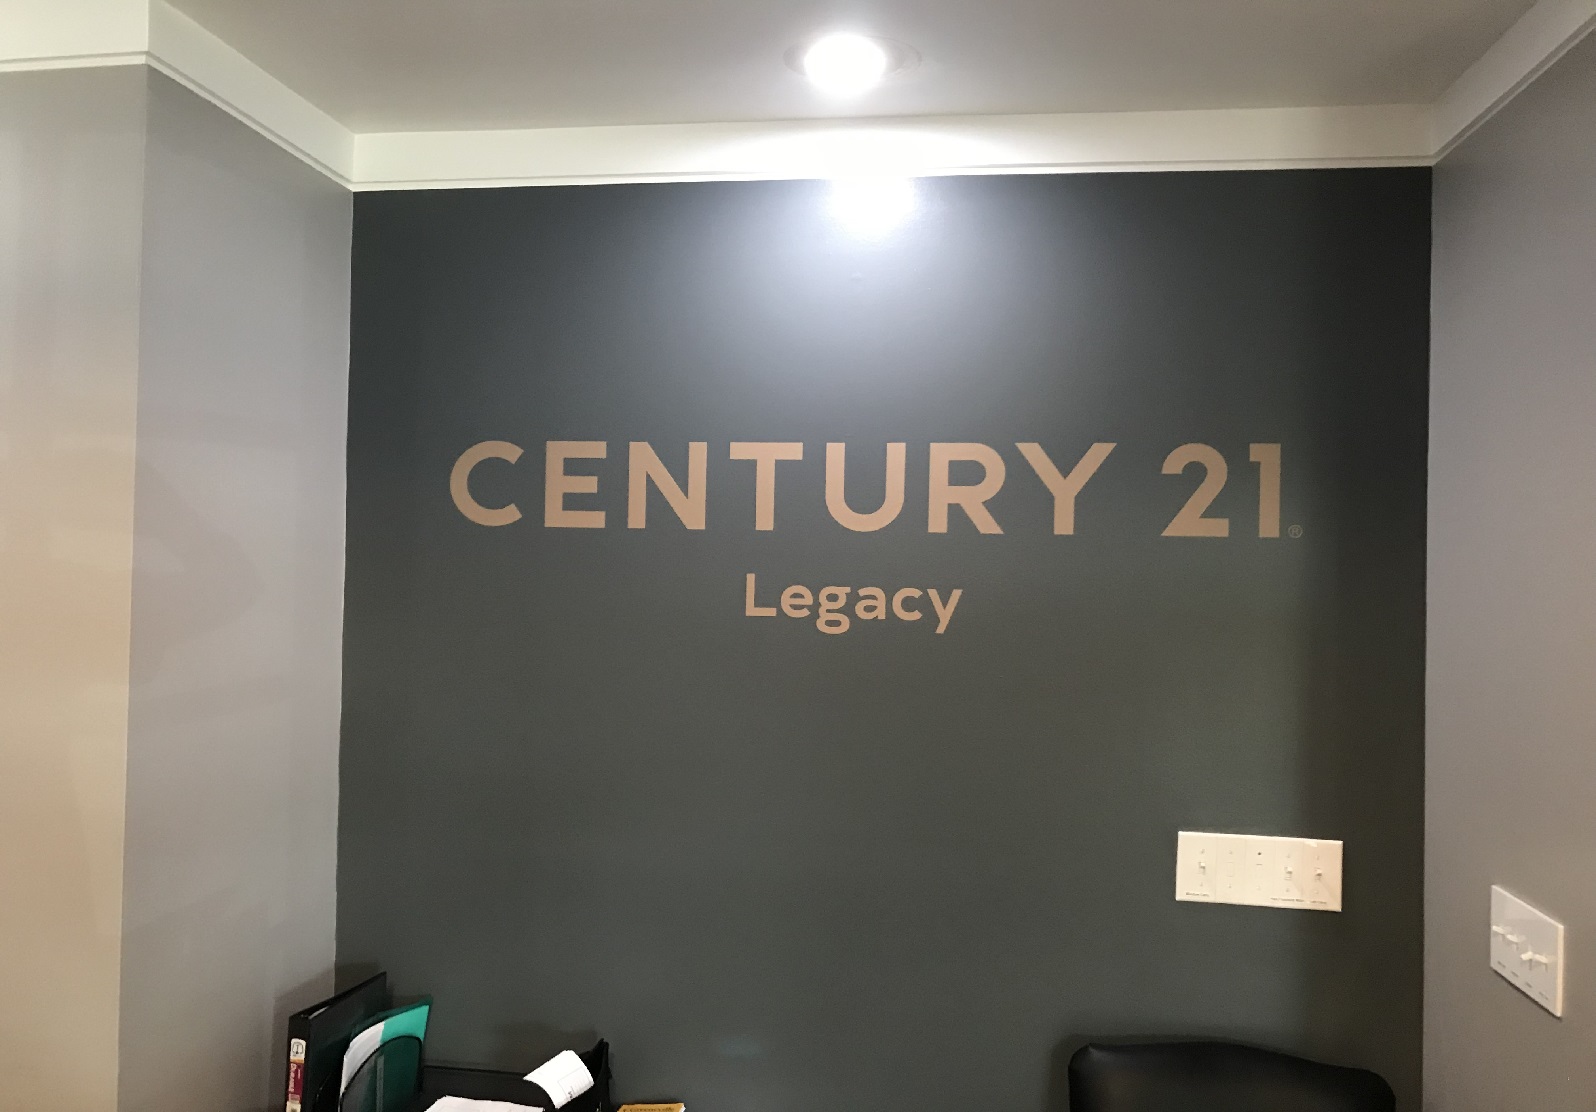 Century 21 Legacy wall graphic